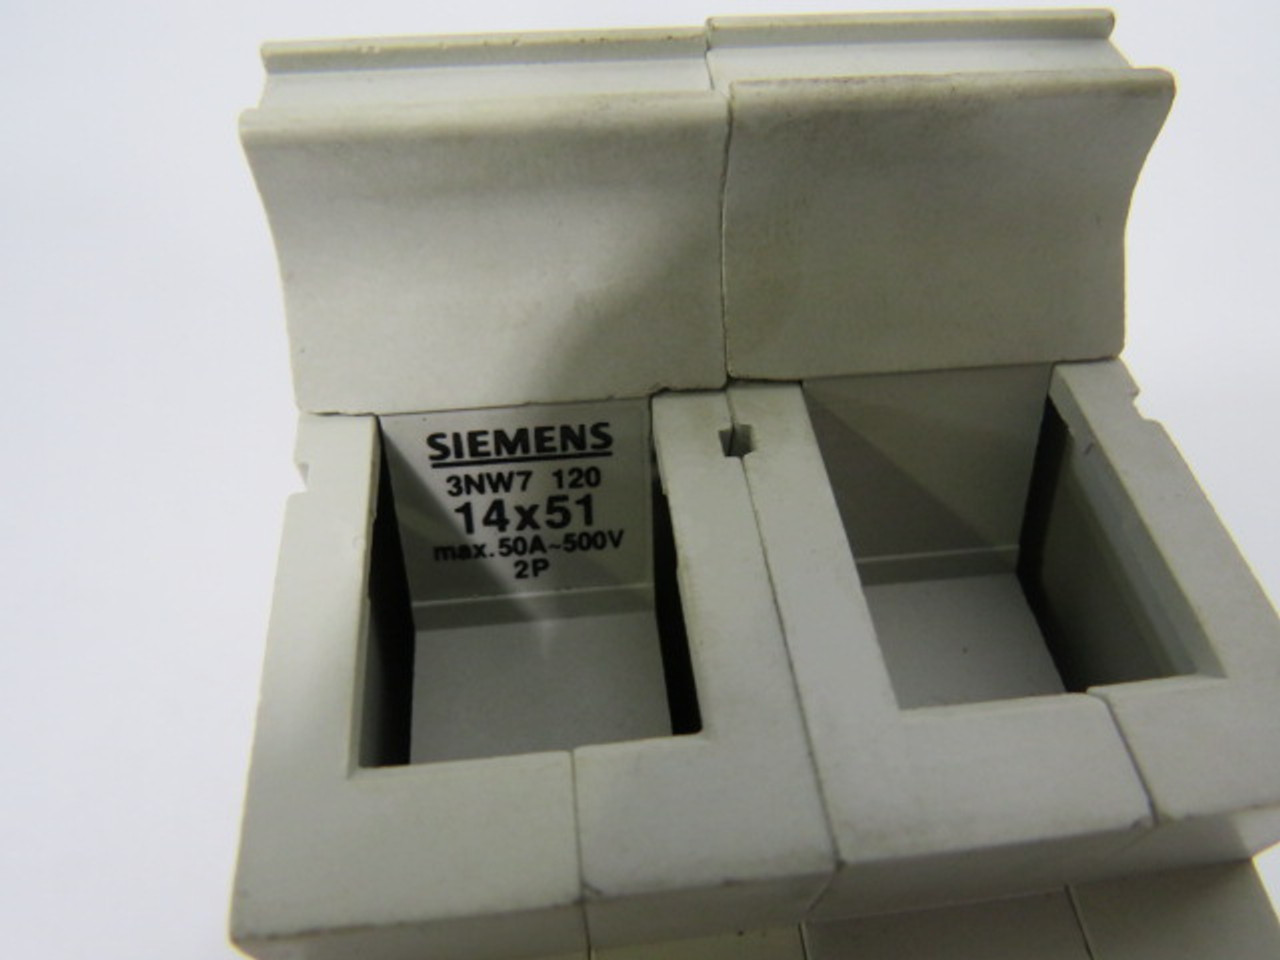 Siemens 3NW7-120 Fuse Holder 50A 500V 2-Pole USED